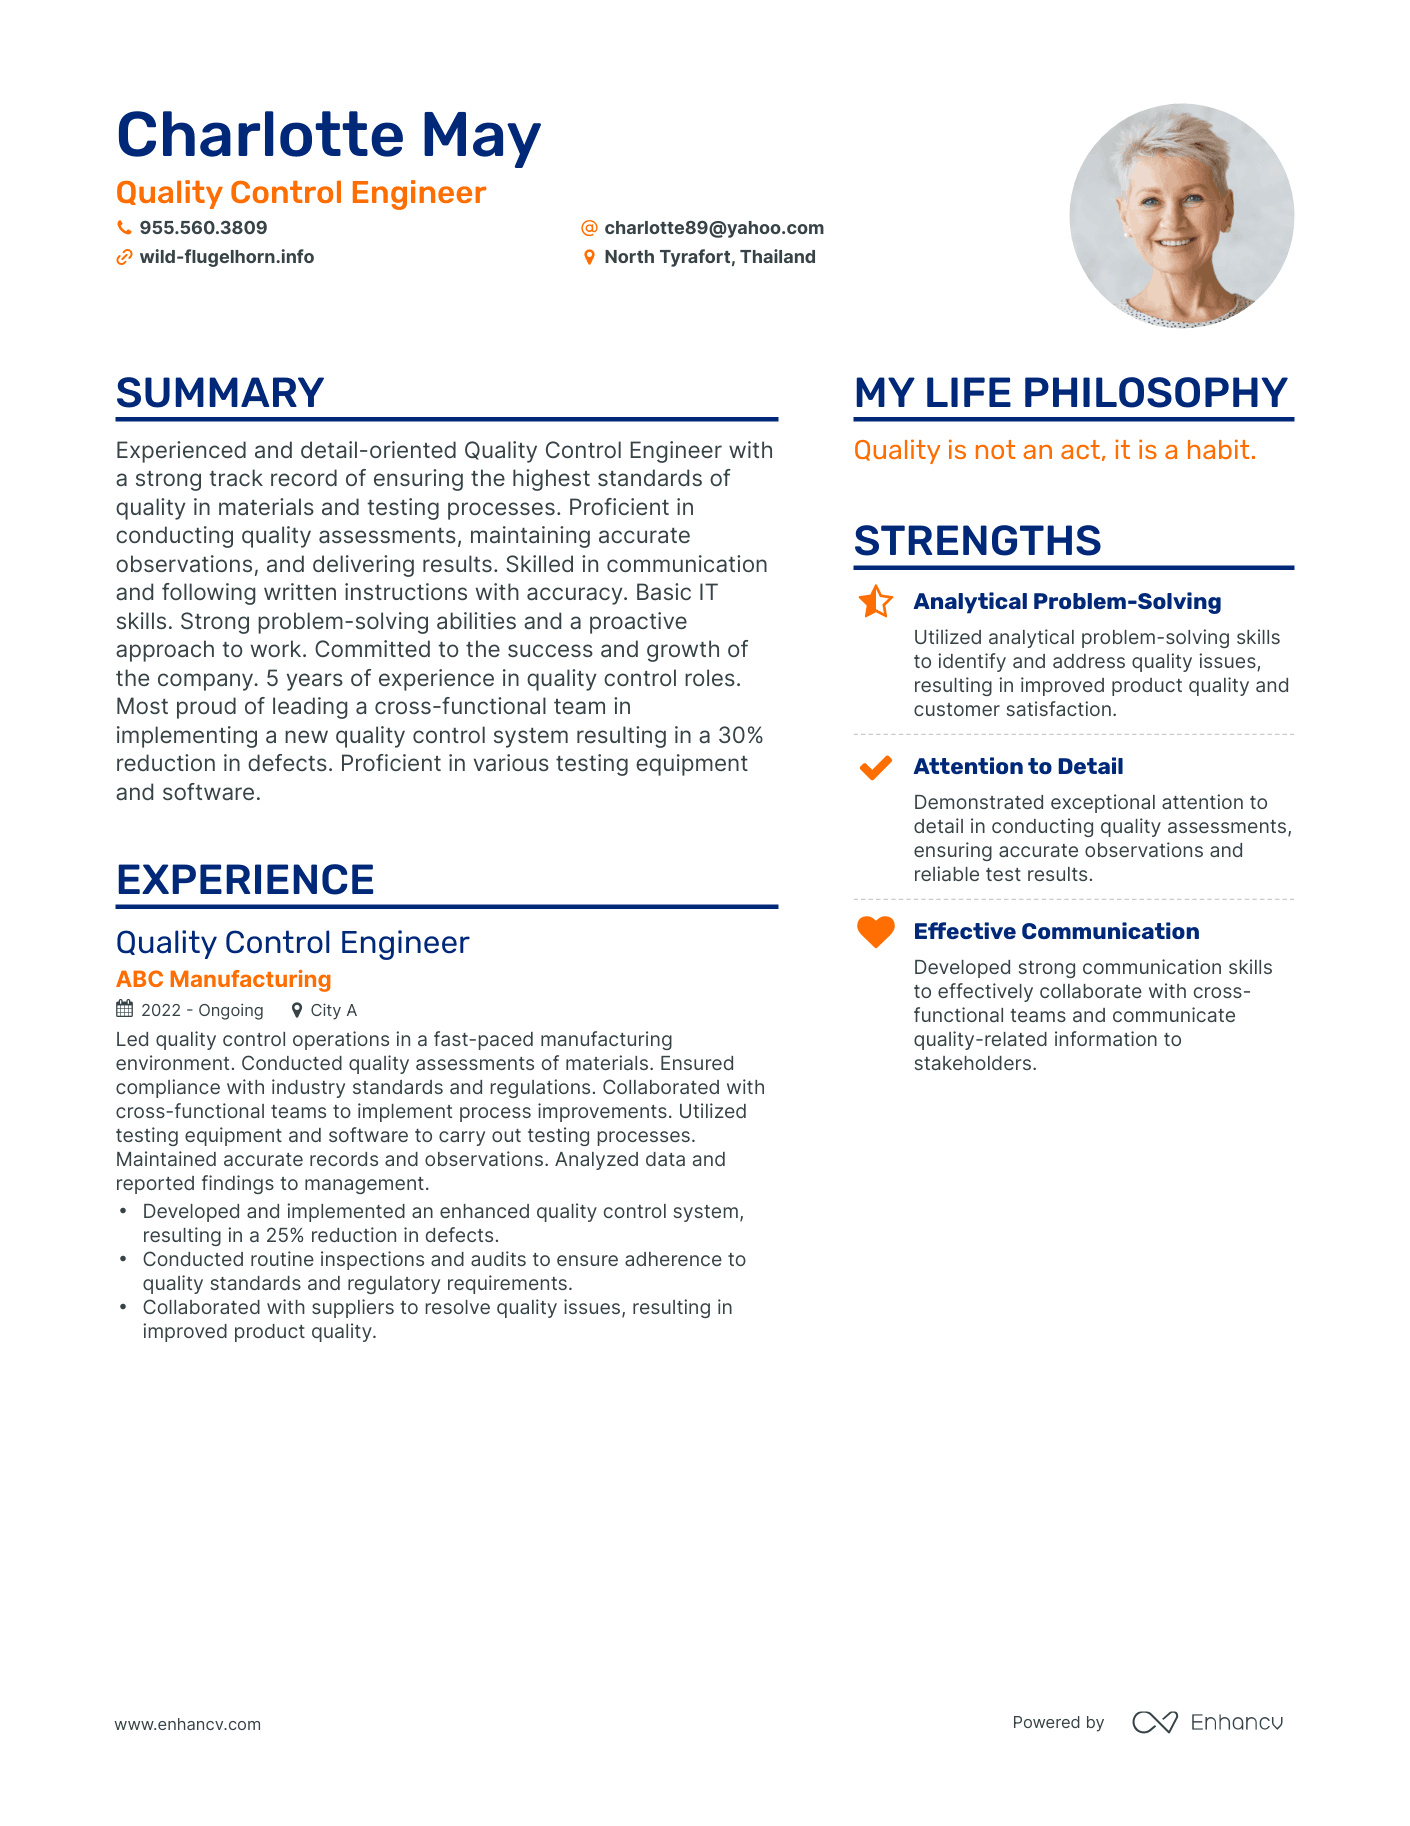 Quality Control Engineer resume example